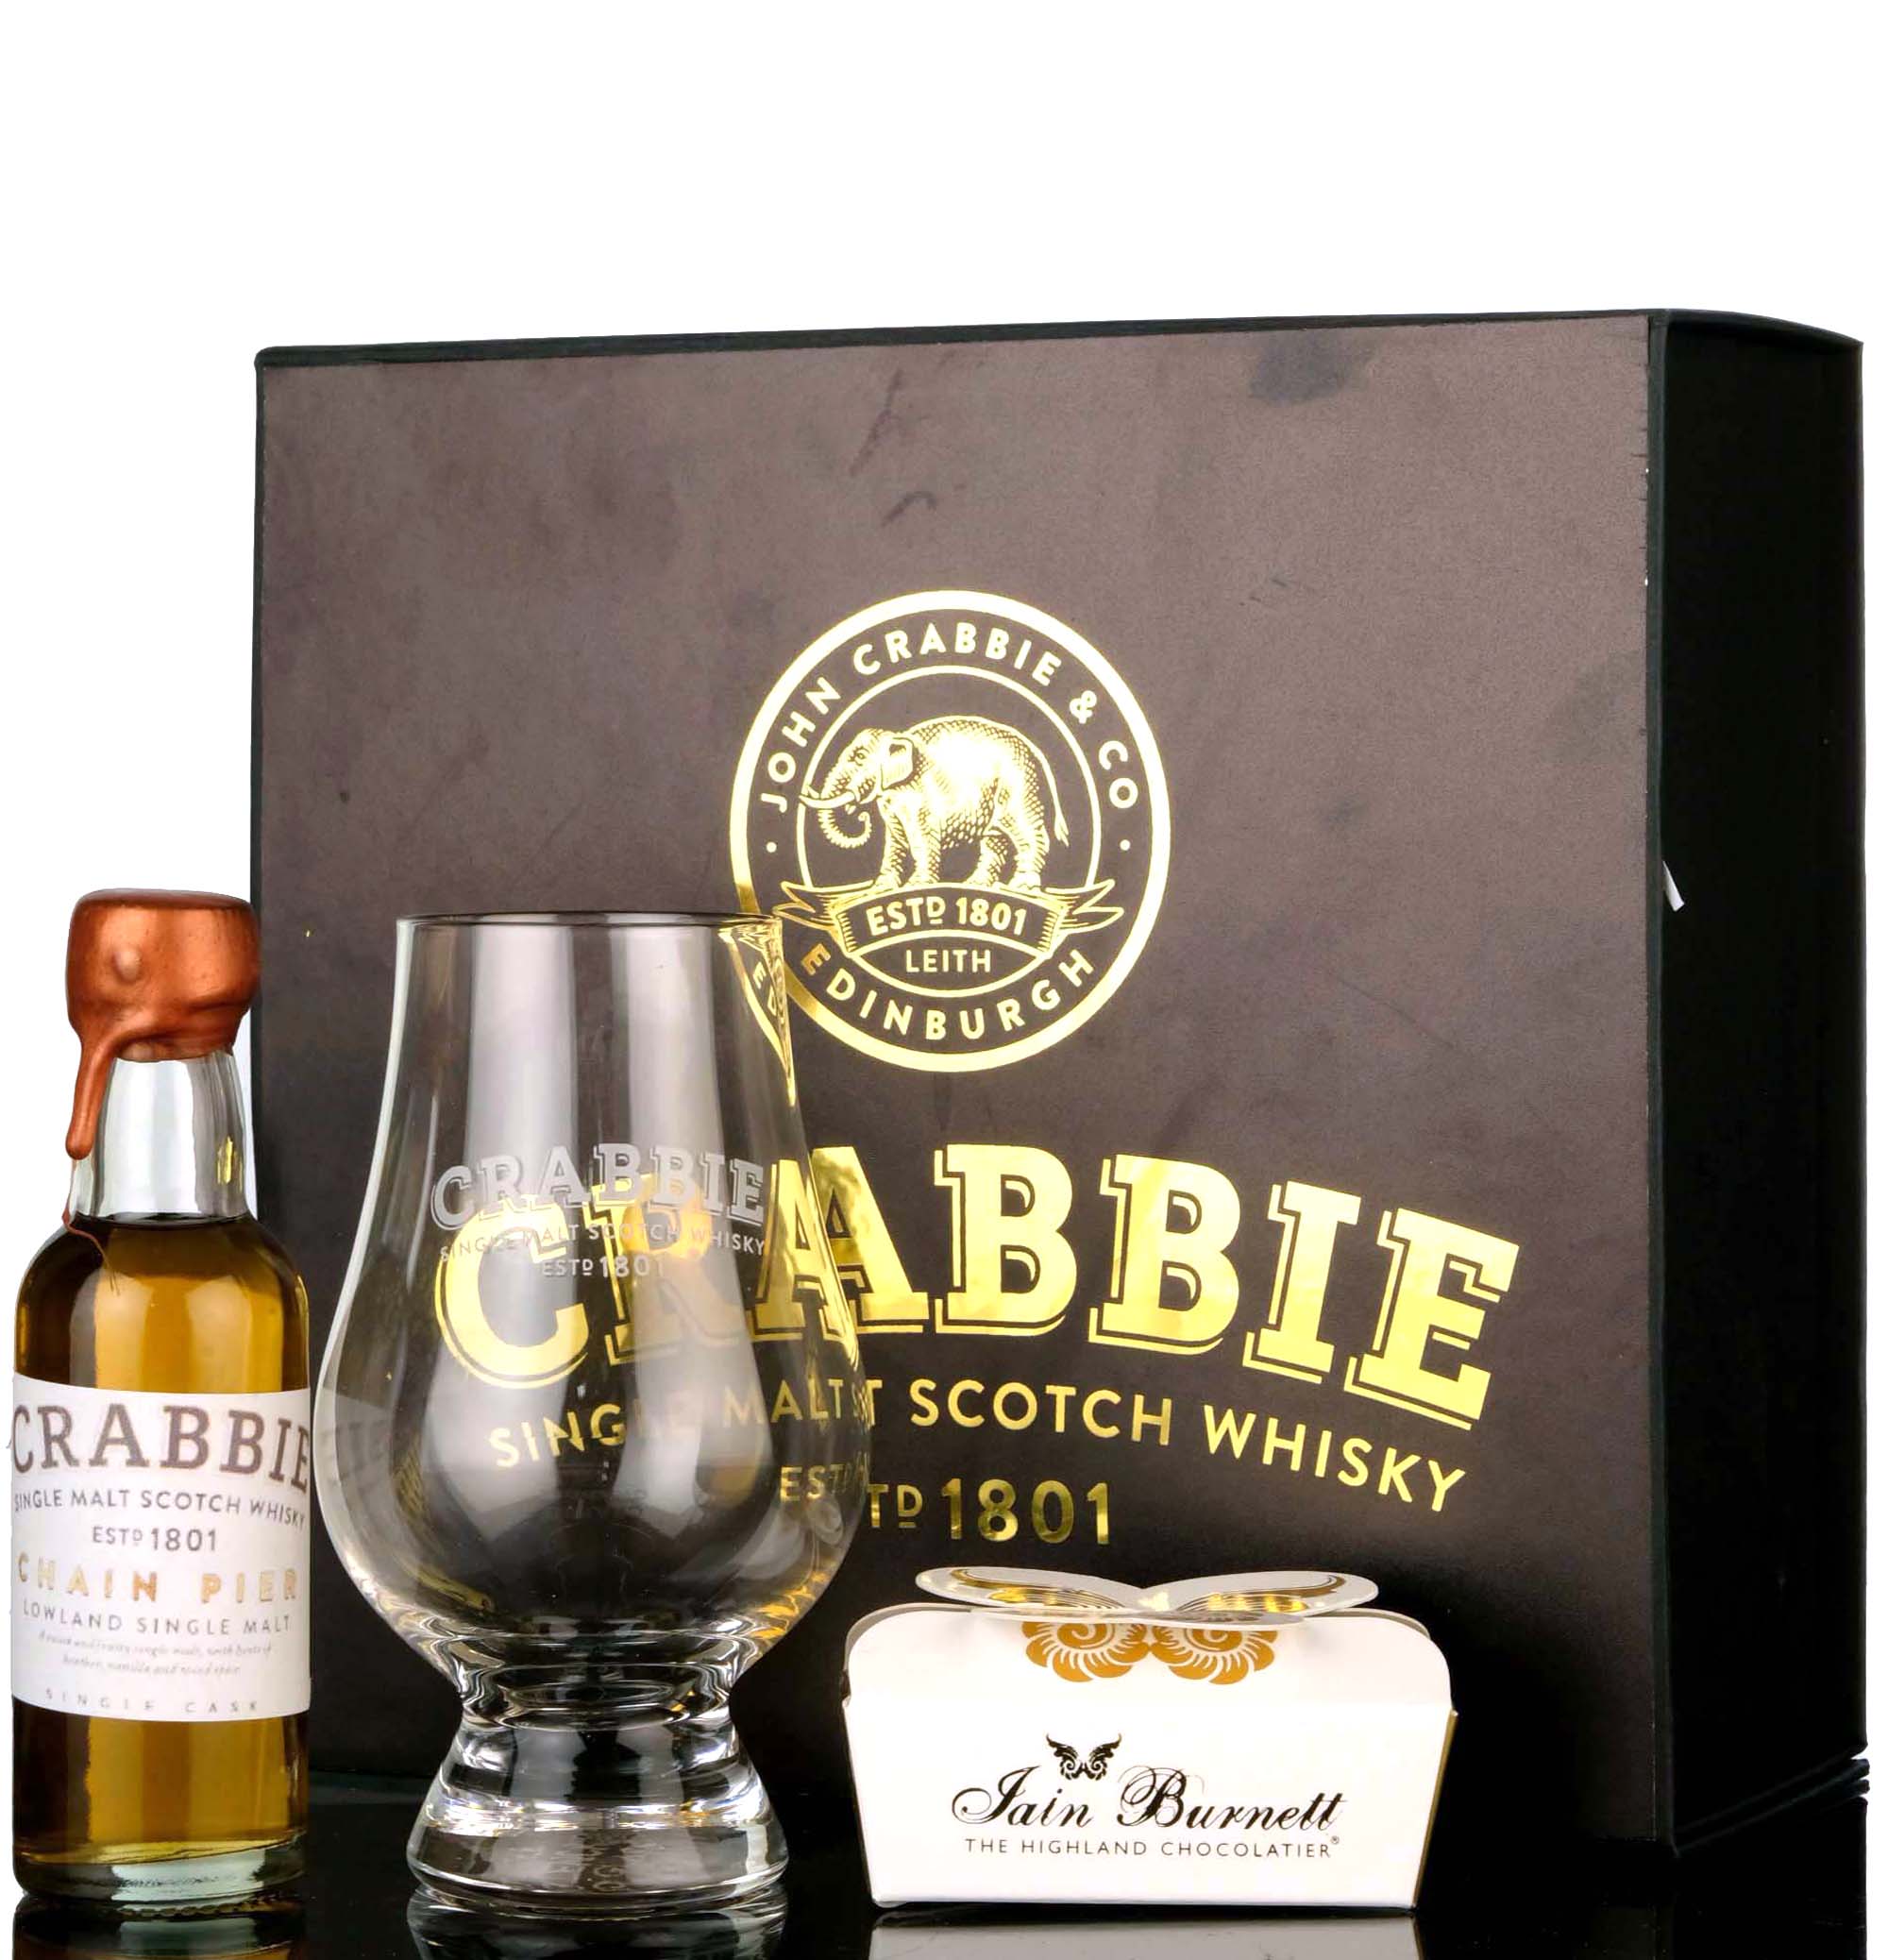 Crabbie Chain Pier Official Trade Pack